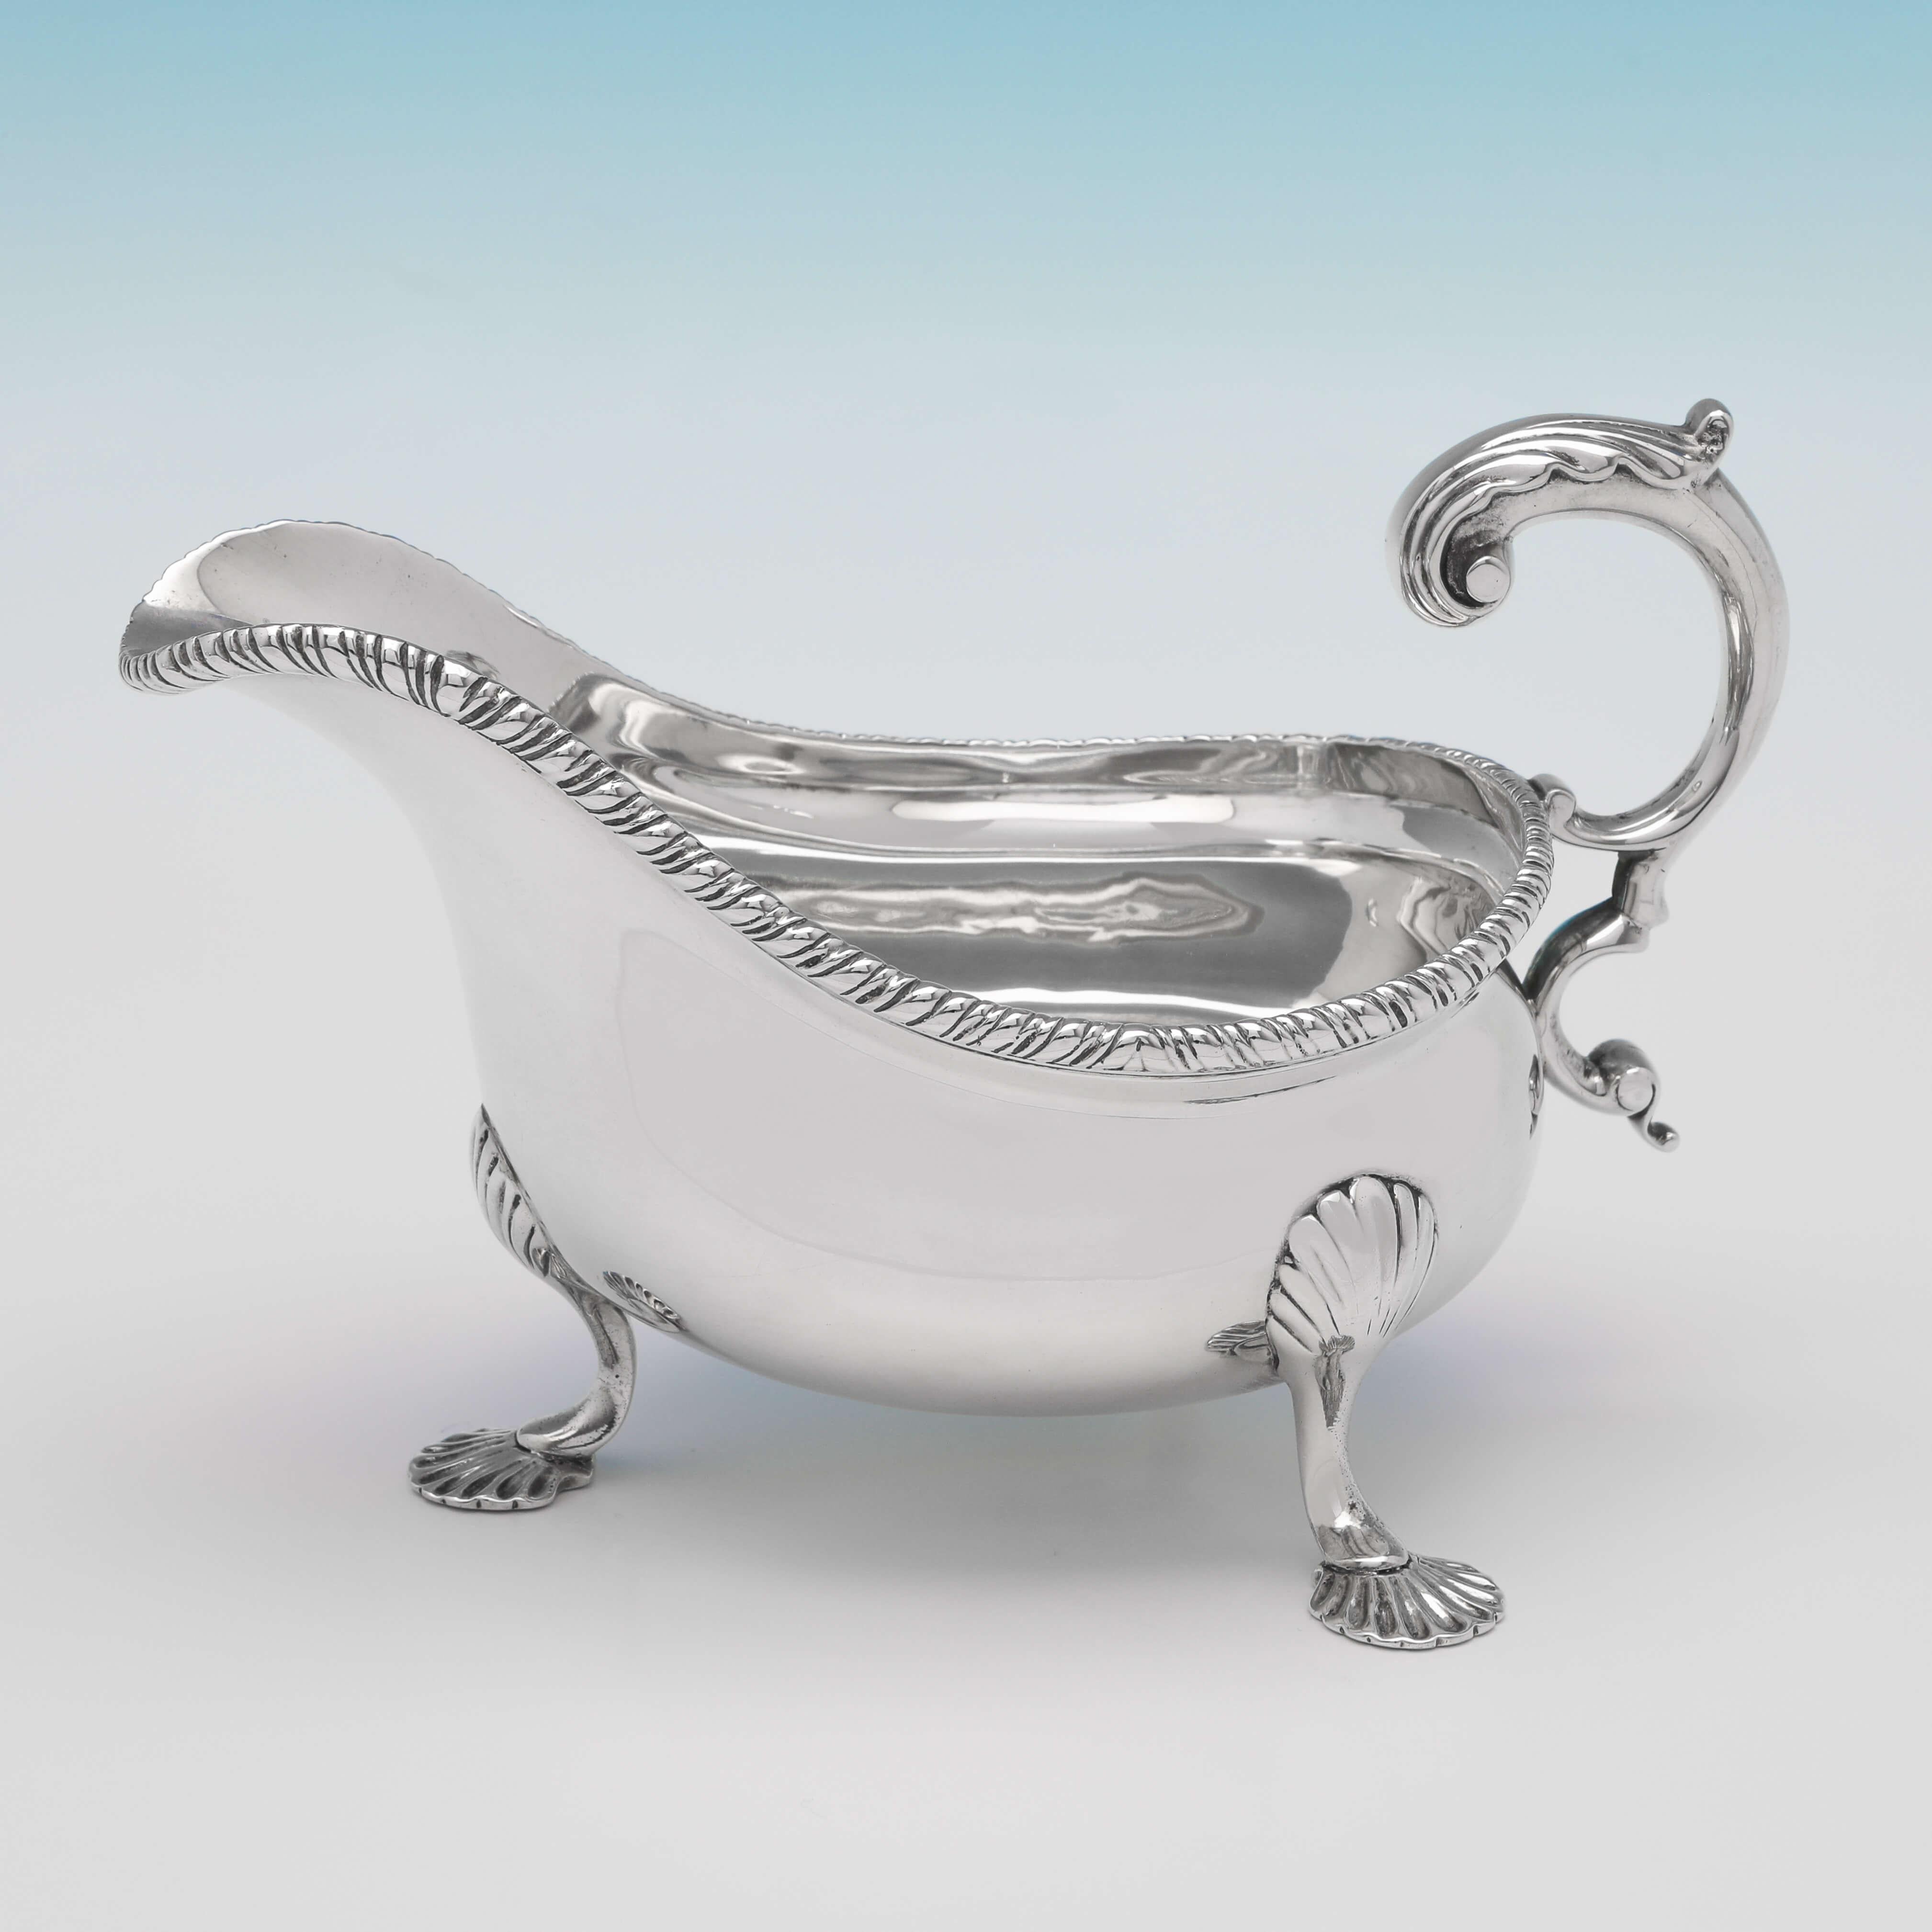 Hallmarked in London in 1896 by Lambert & Co., this handsome, pair of Victorian, Antique Sterling Silver Sauce Boats, feature gadroon borders, acanthus detailed flying C-scroll handles, and stand on three feet. Each sauce boat measures 4.25